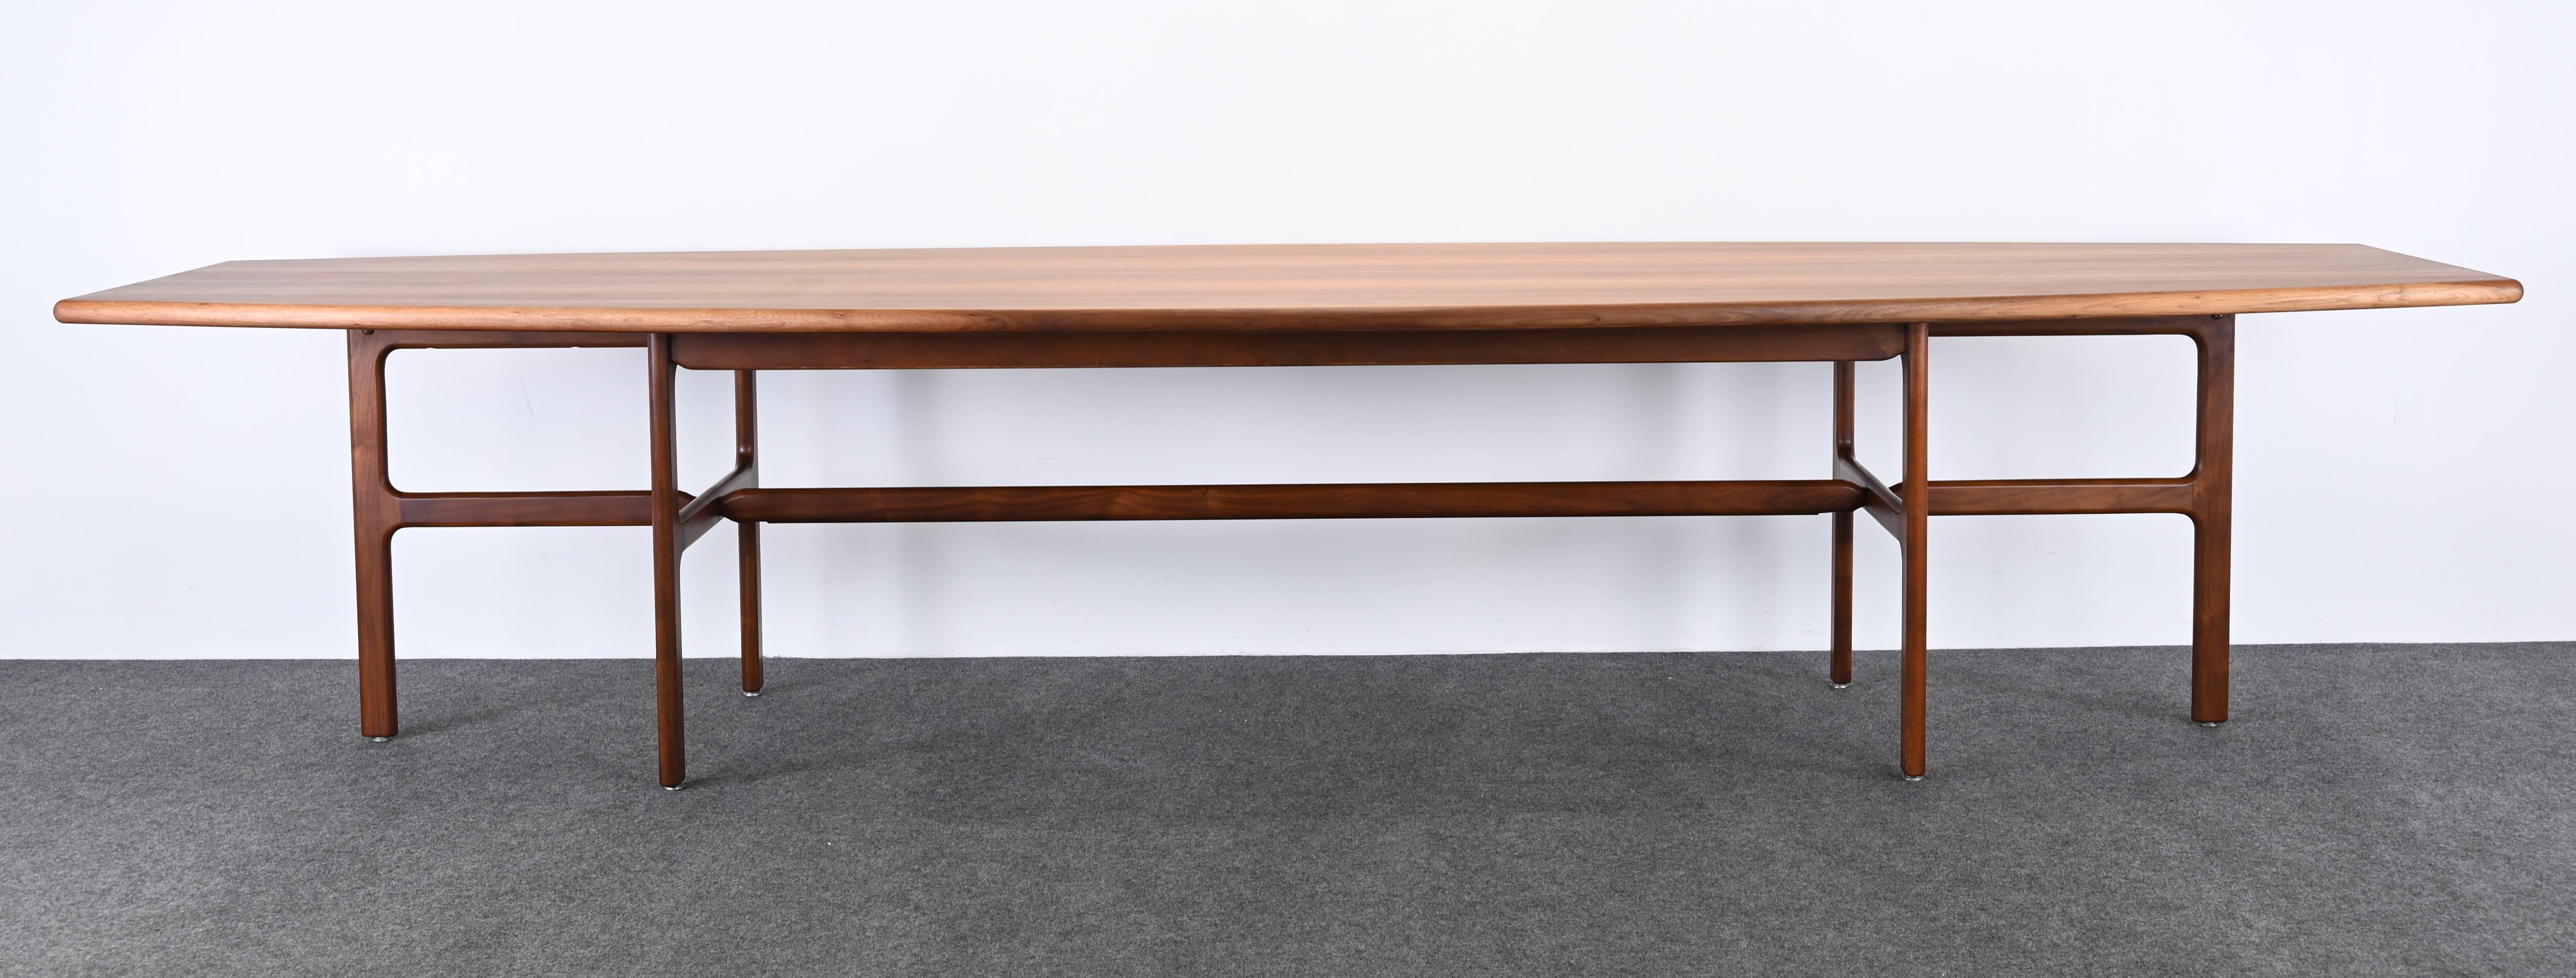 Mid-Century Modern Conference Table or Dining Table by Jens Risom, 1963